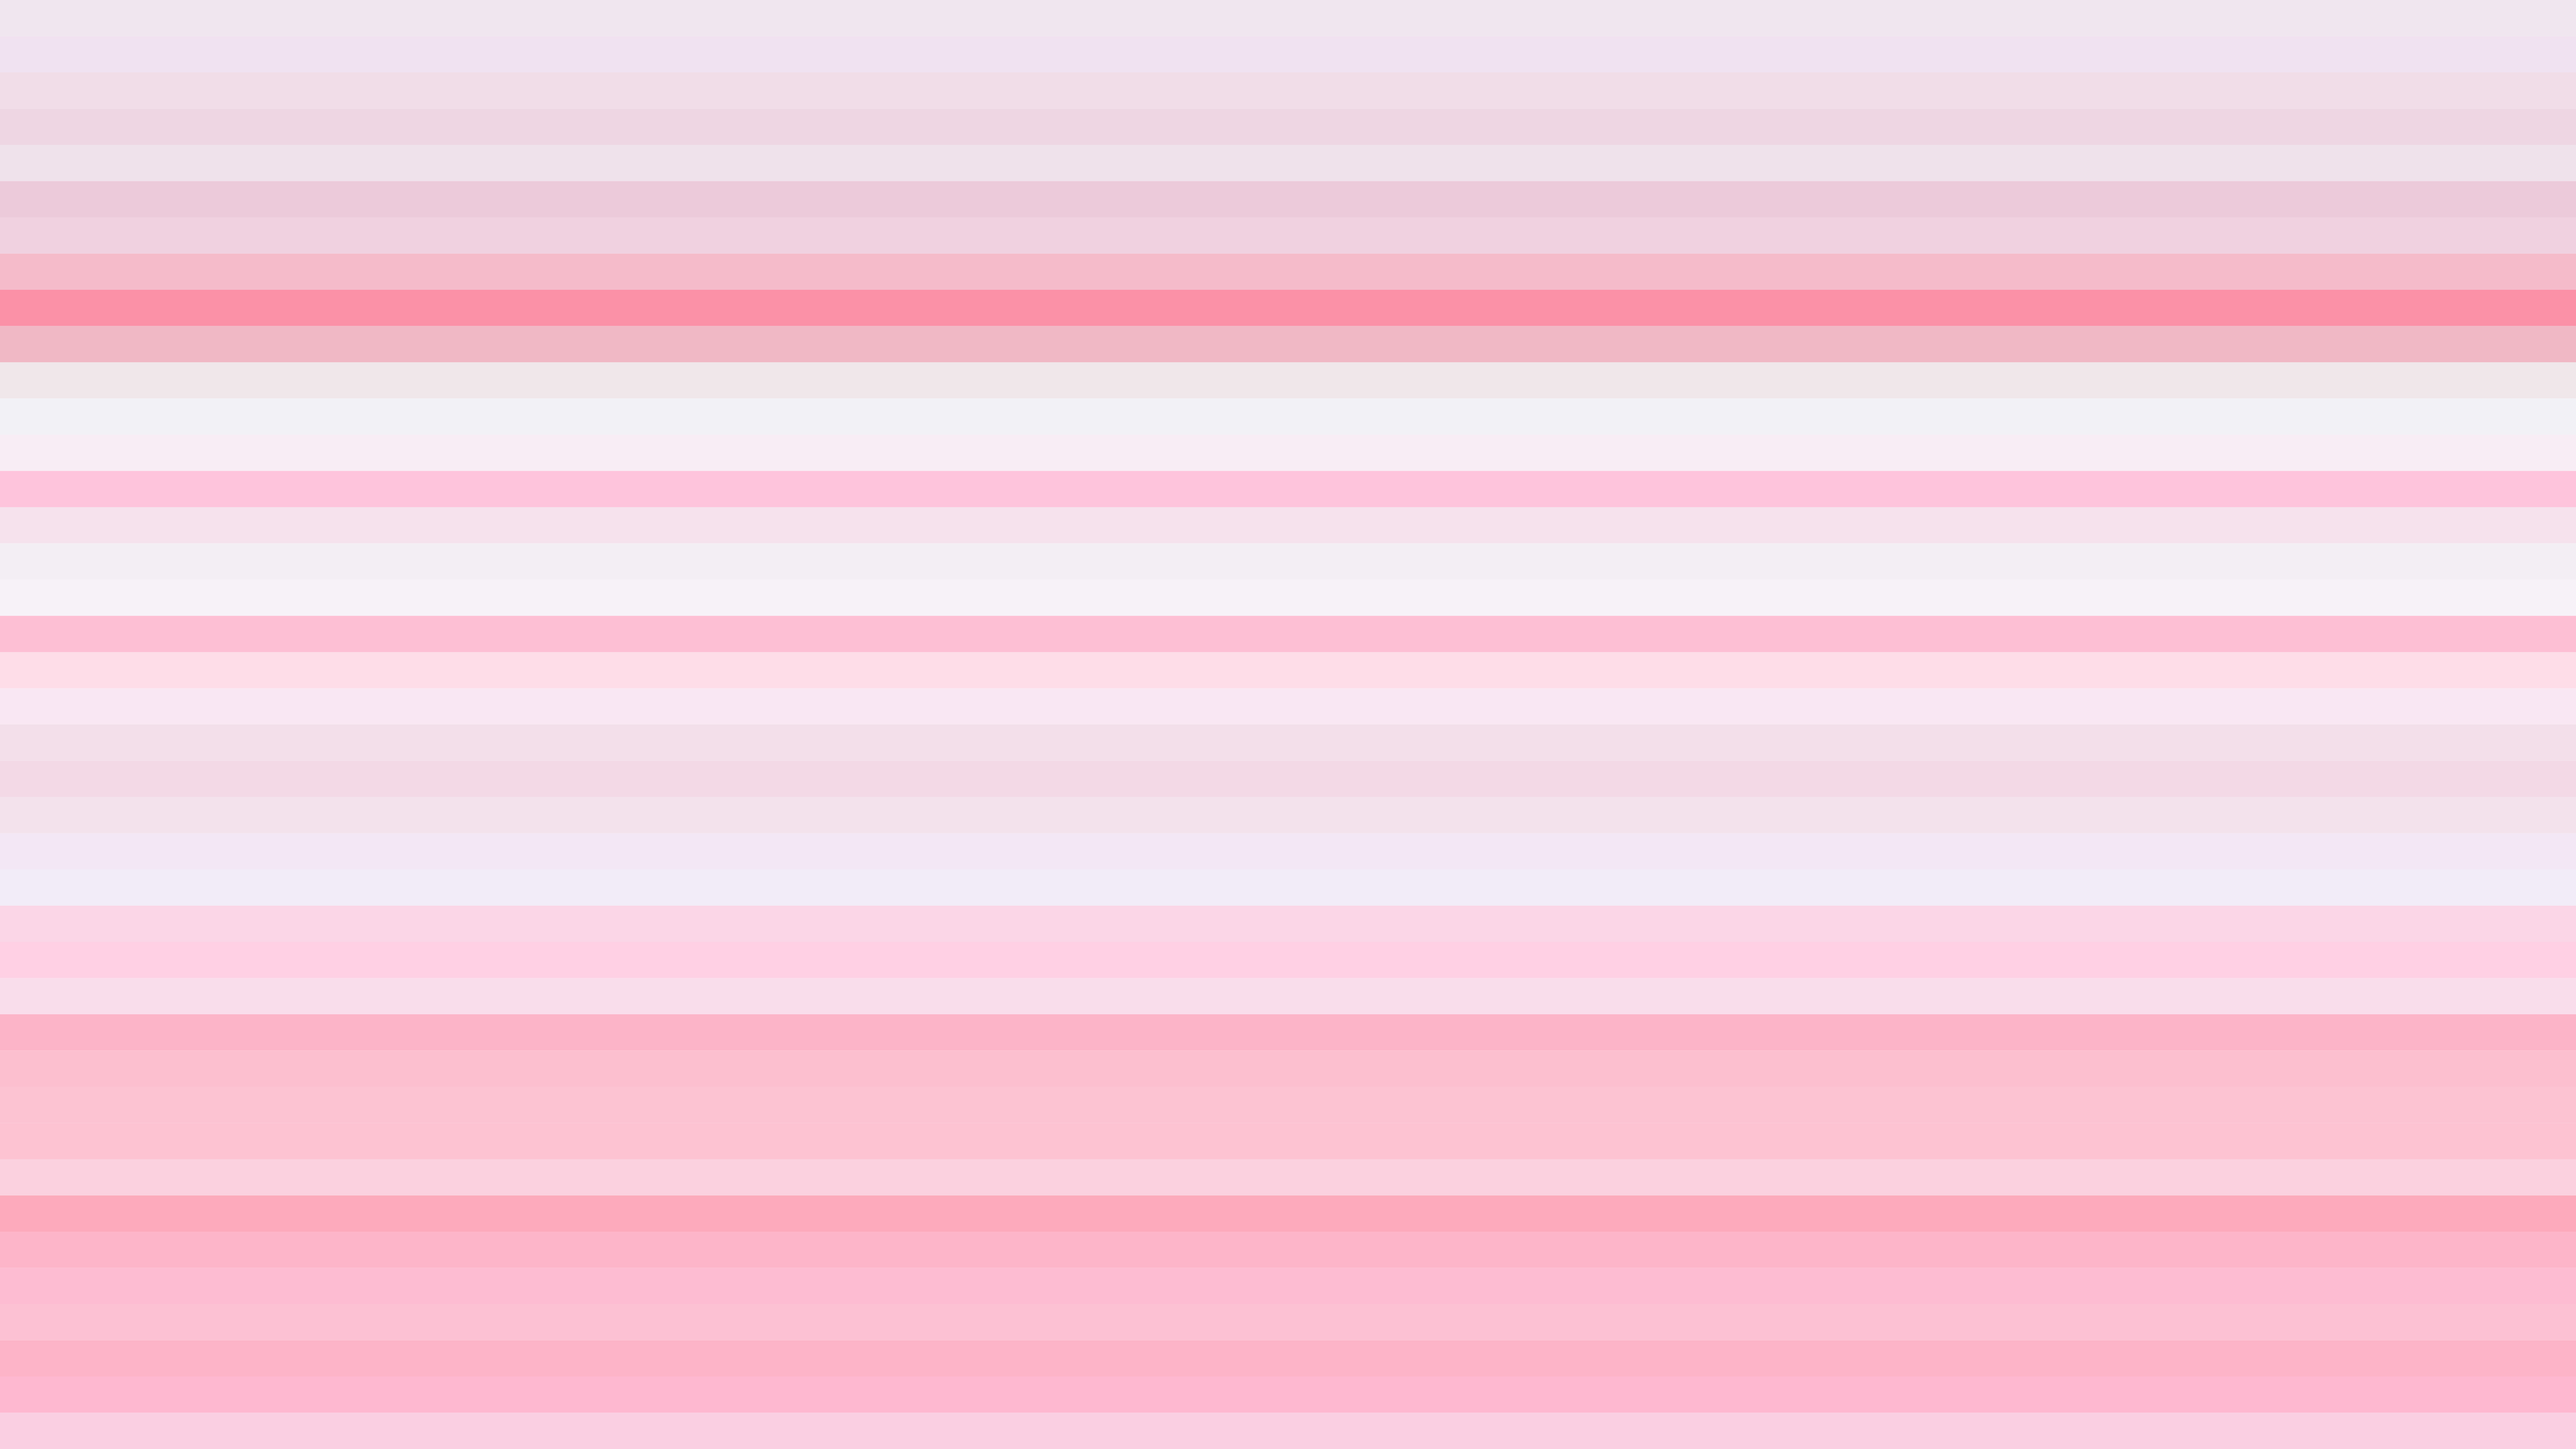 Pink And White Striped Backgrounds